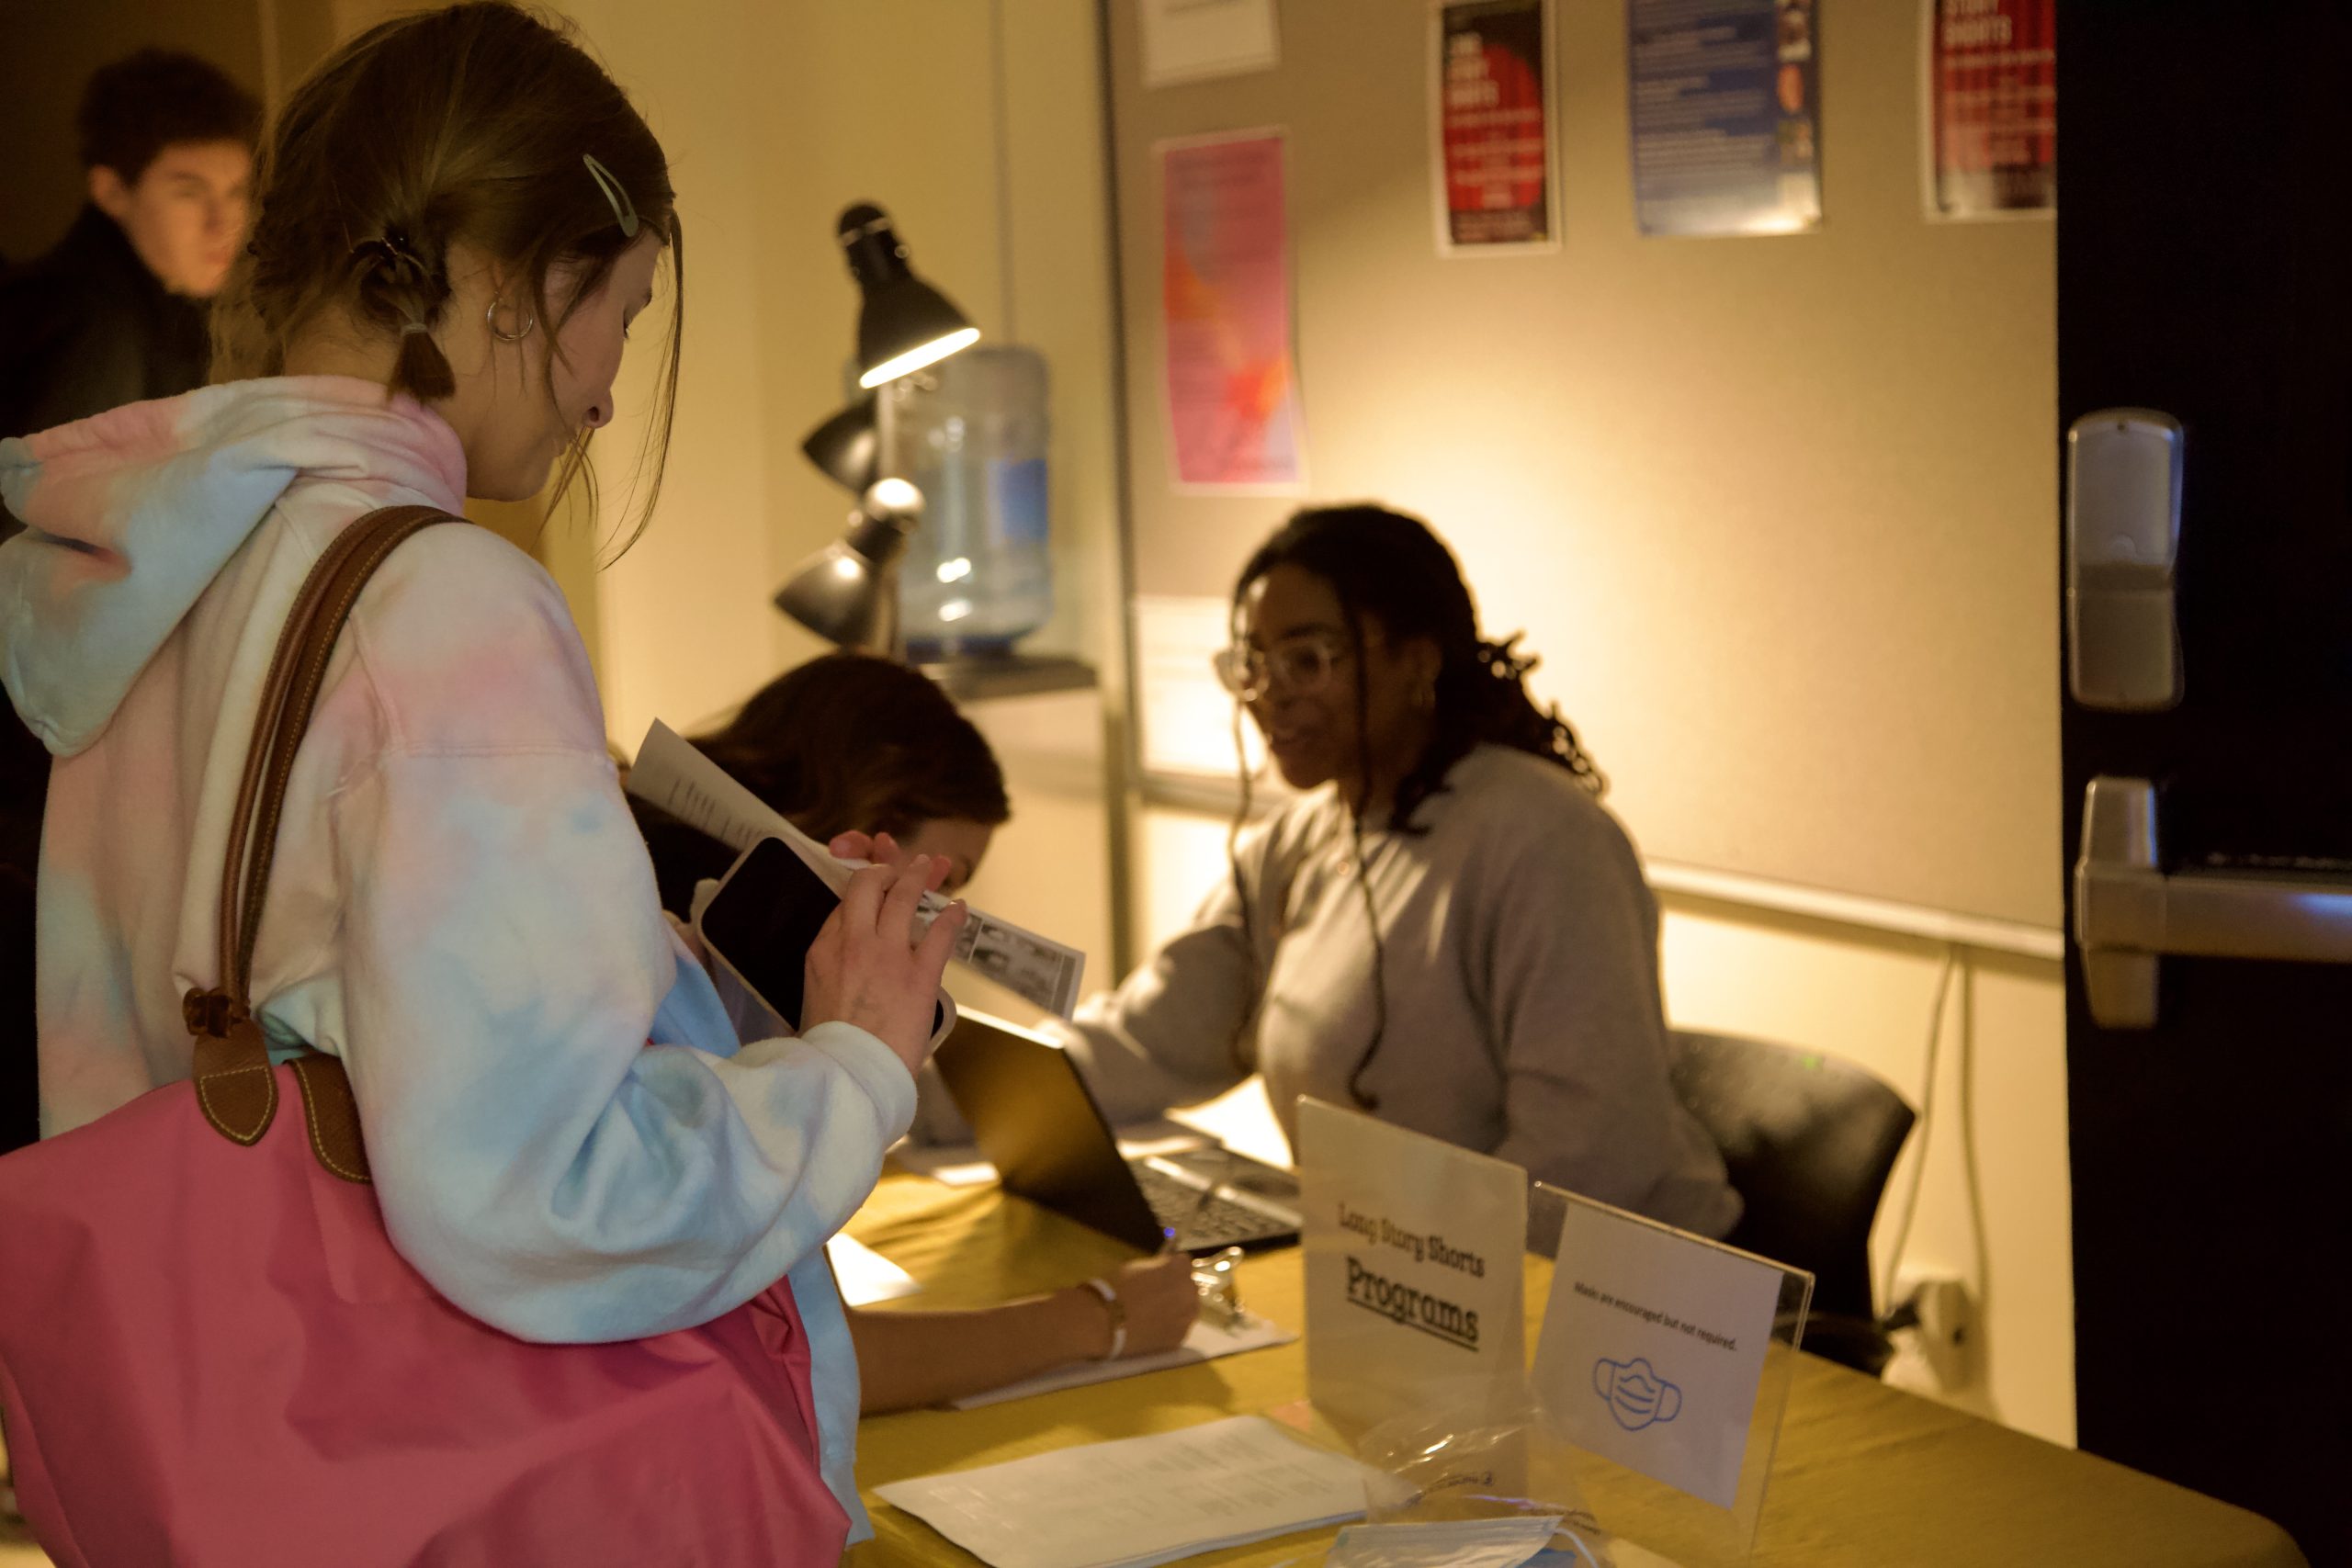 Students at the check-in table for Long Story Shorts